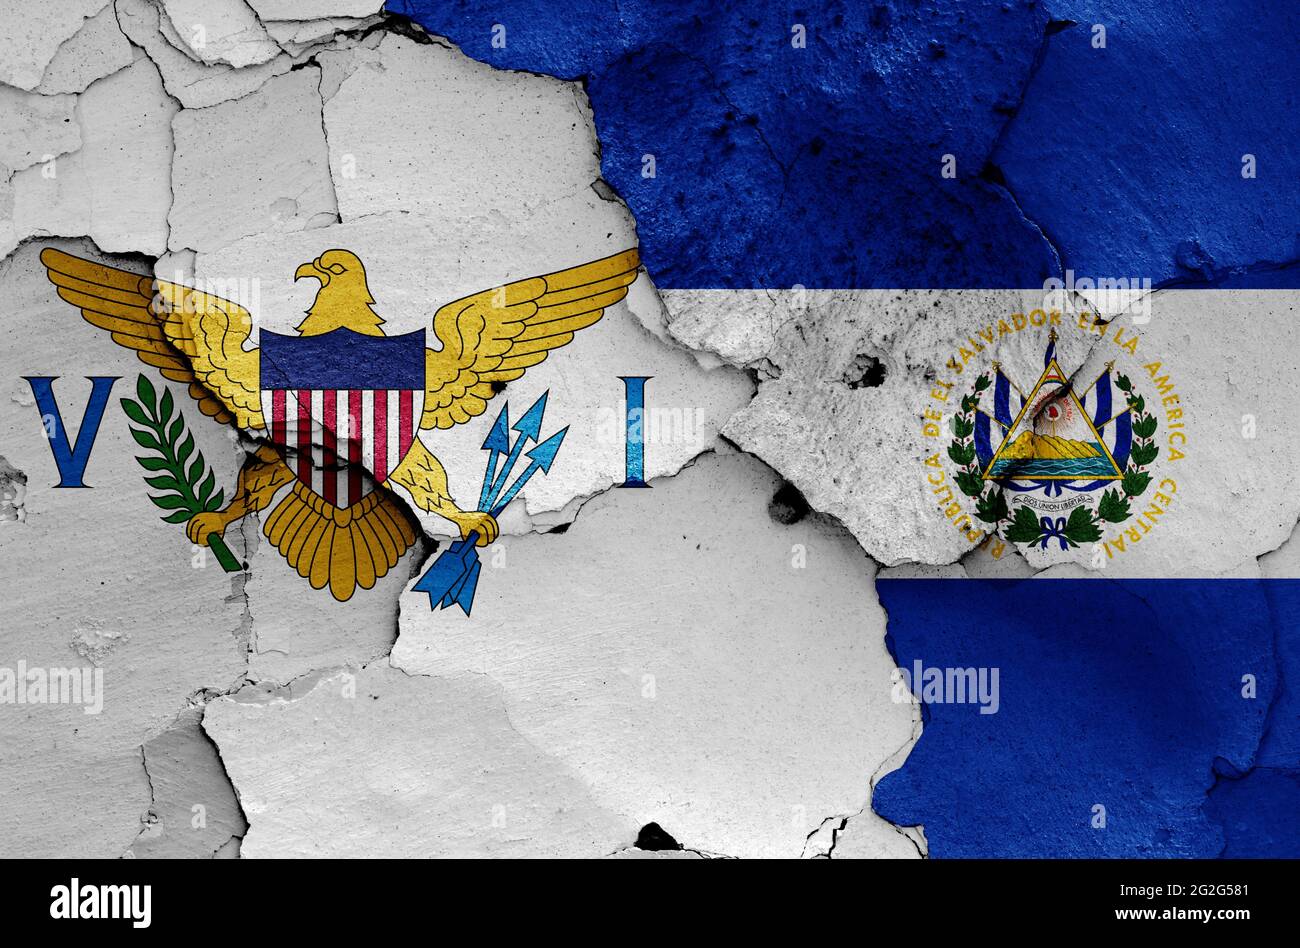 flags of U.S. Virgin Islands and El Salvador painted on cracked wall Stock Photo